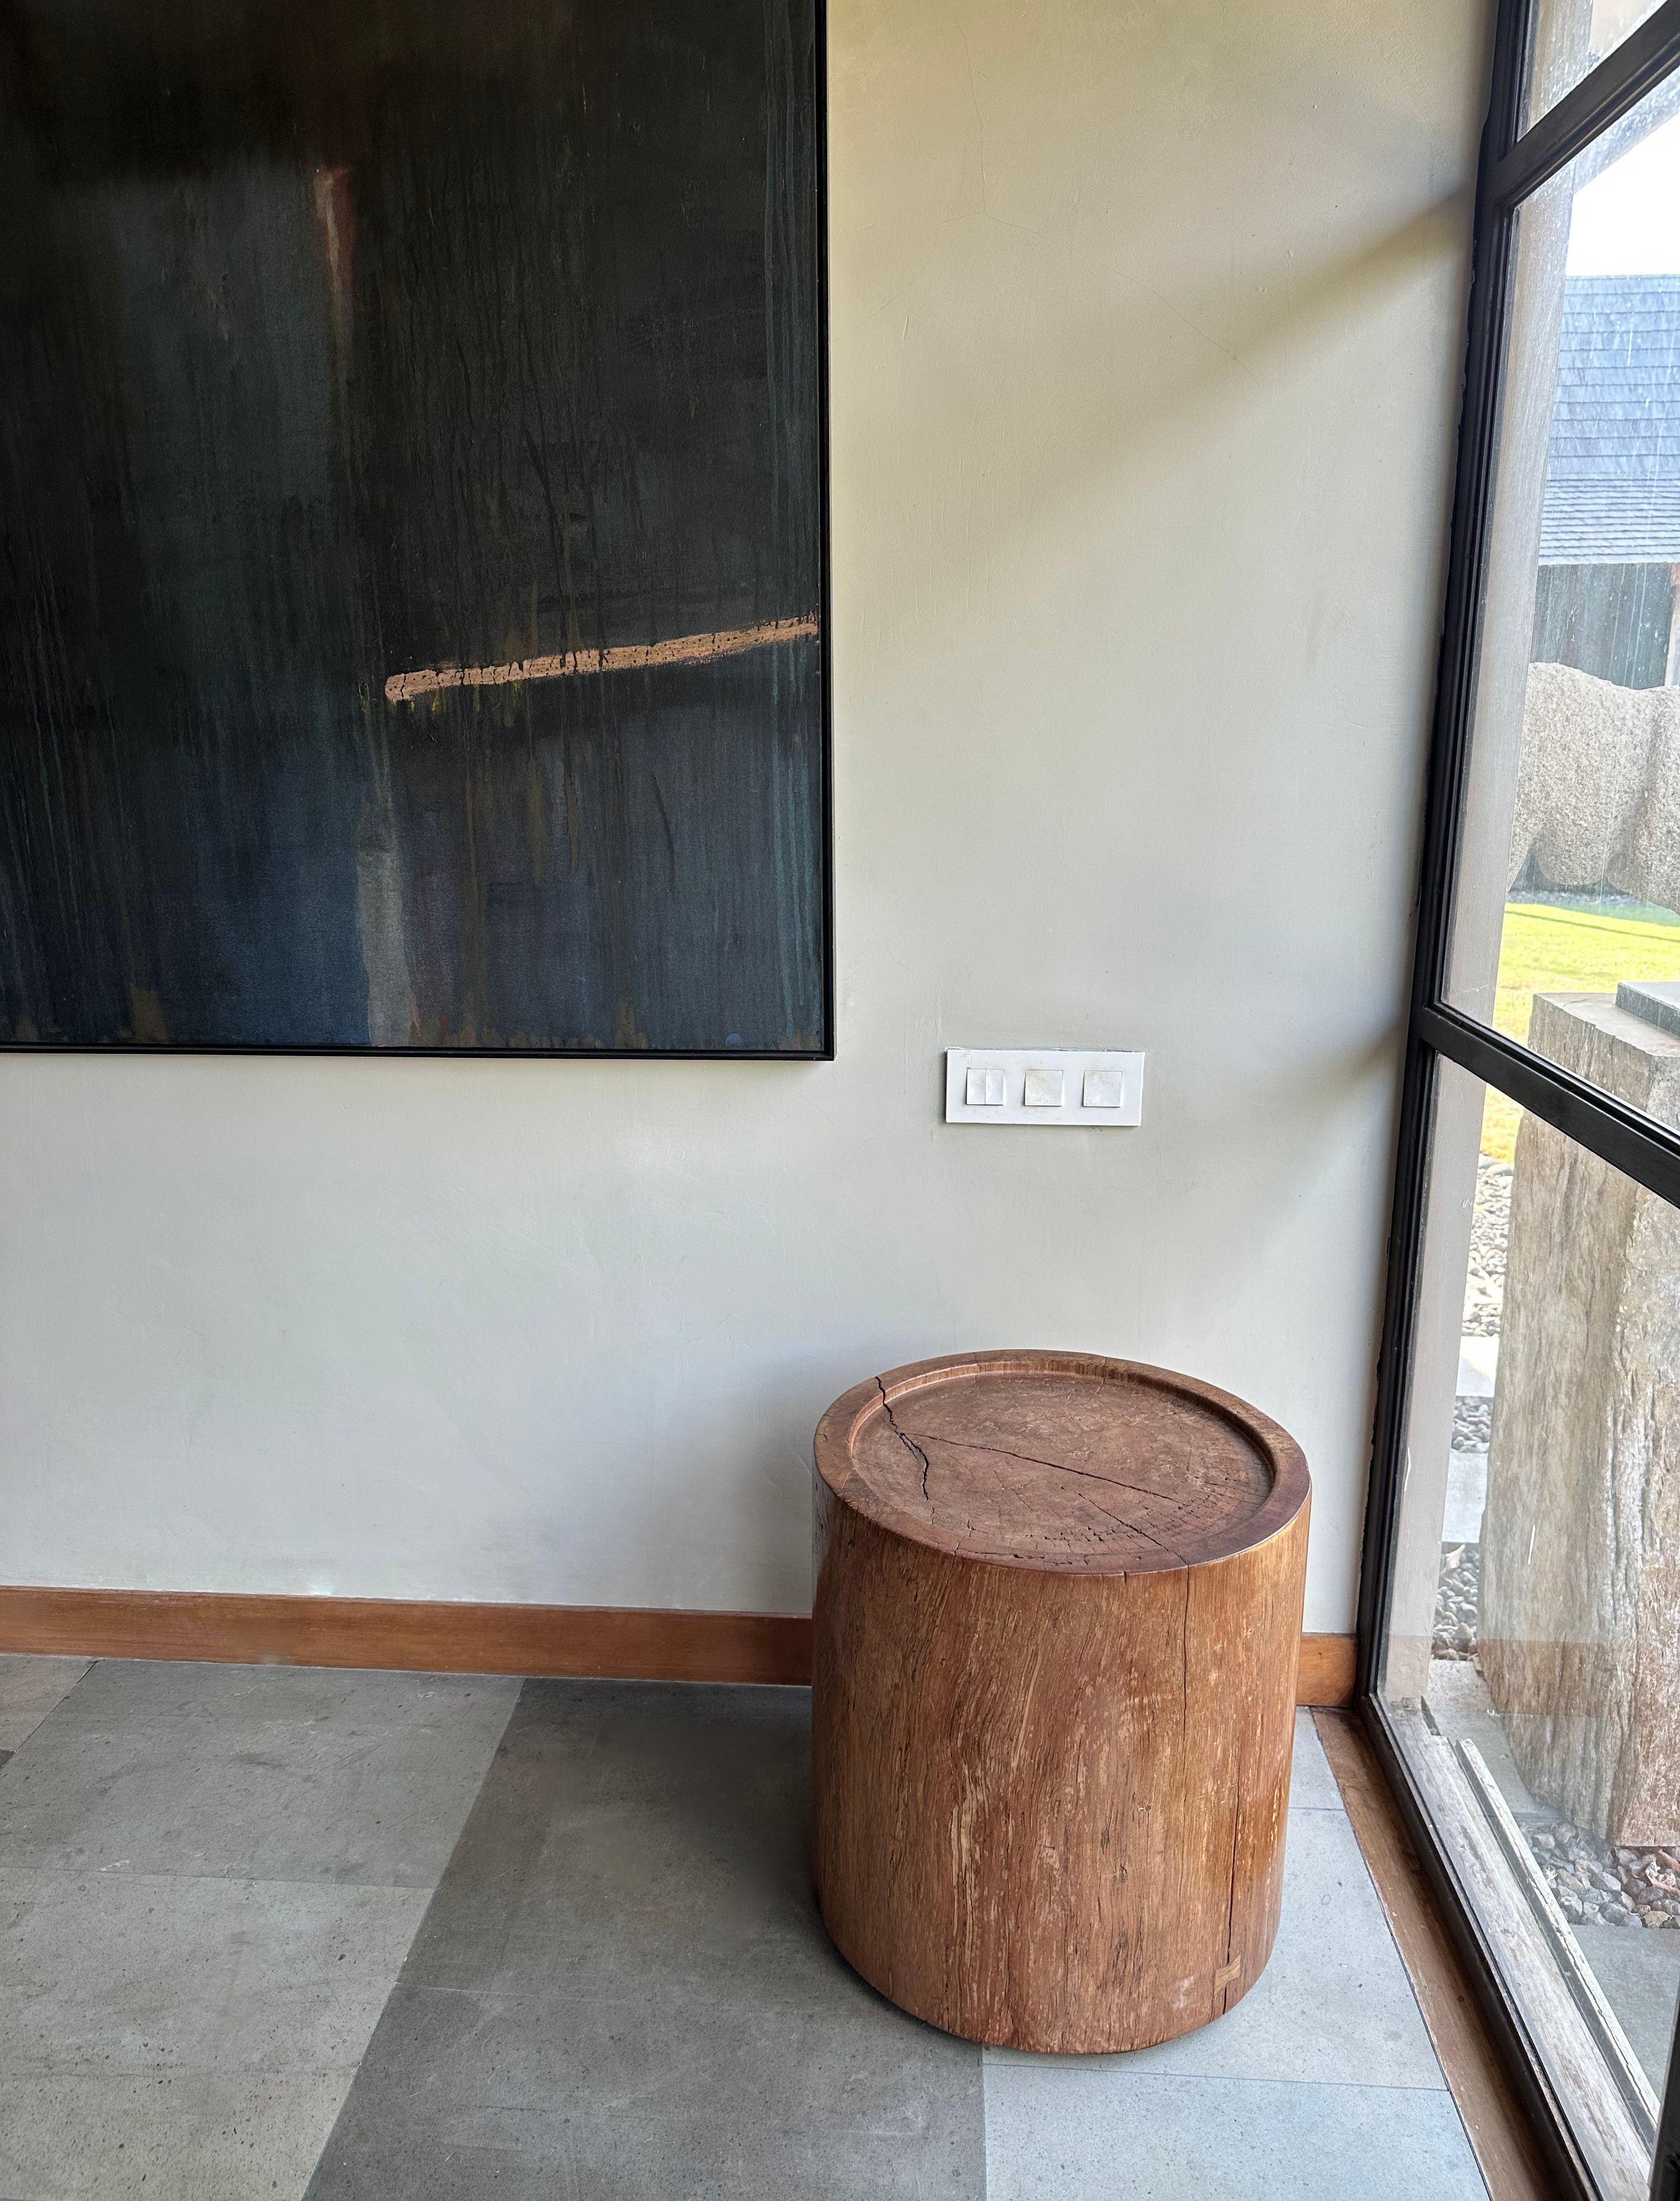 A wonderfully sculptural side table crafted from Maranti Wood. Maranti Wood is known for its strong and durable nature as well its unique wood textures and shades. The subtly carved basin on the table top with narrow border add to its charm. The